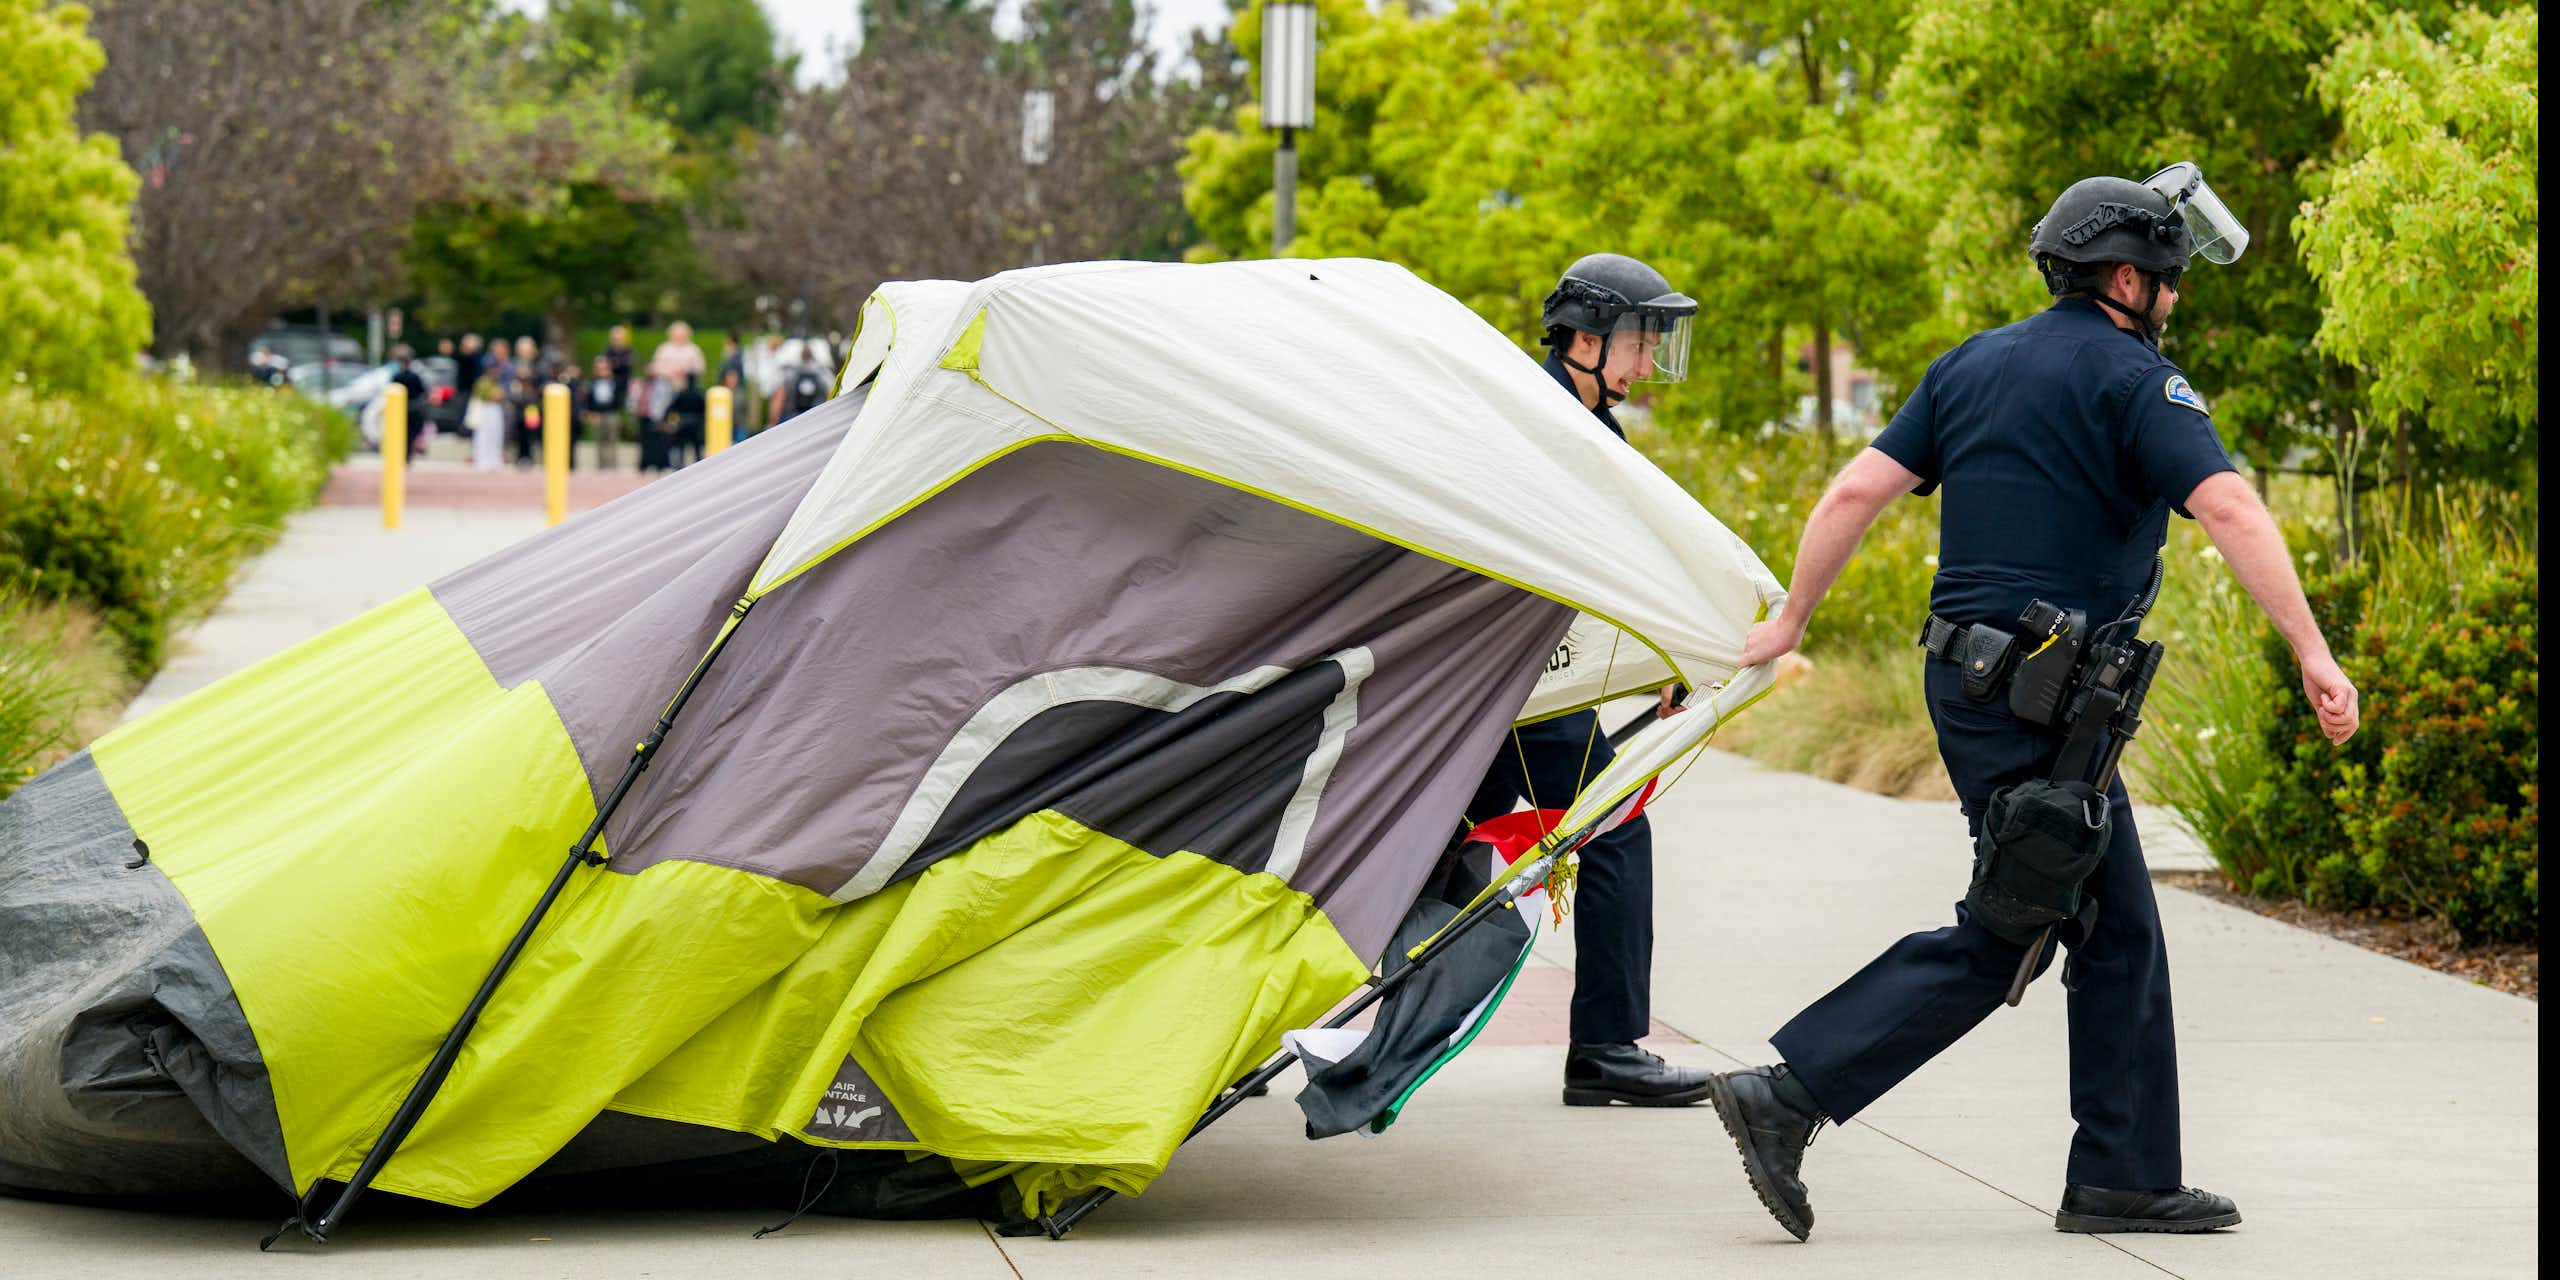 Two police officers drag a tent.